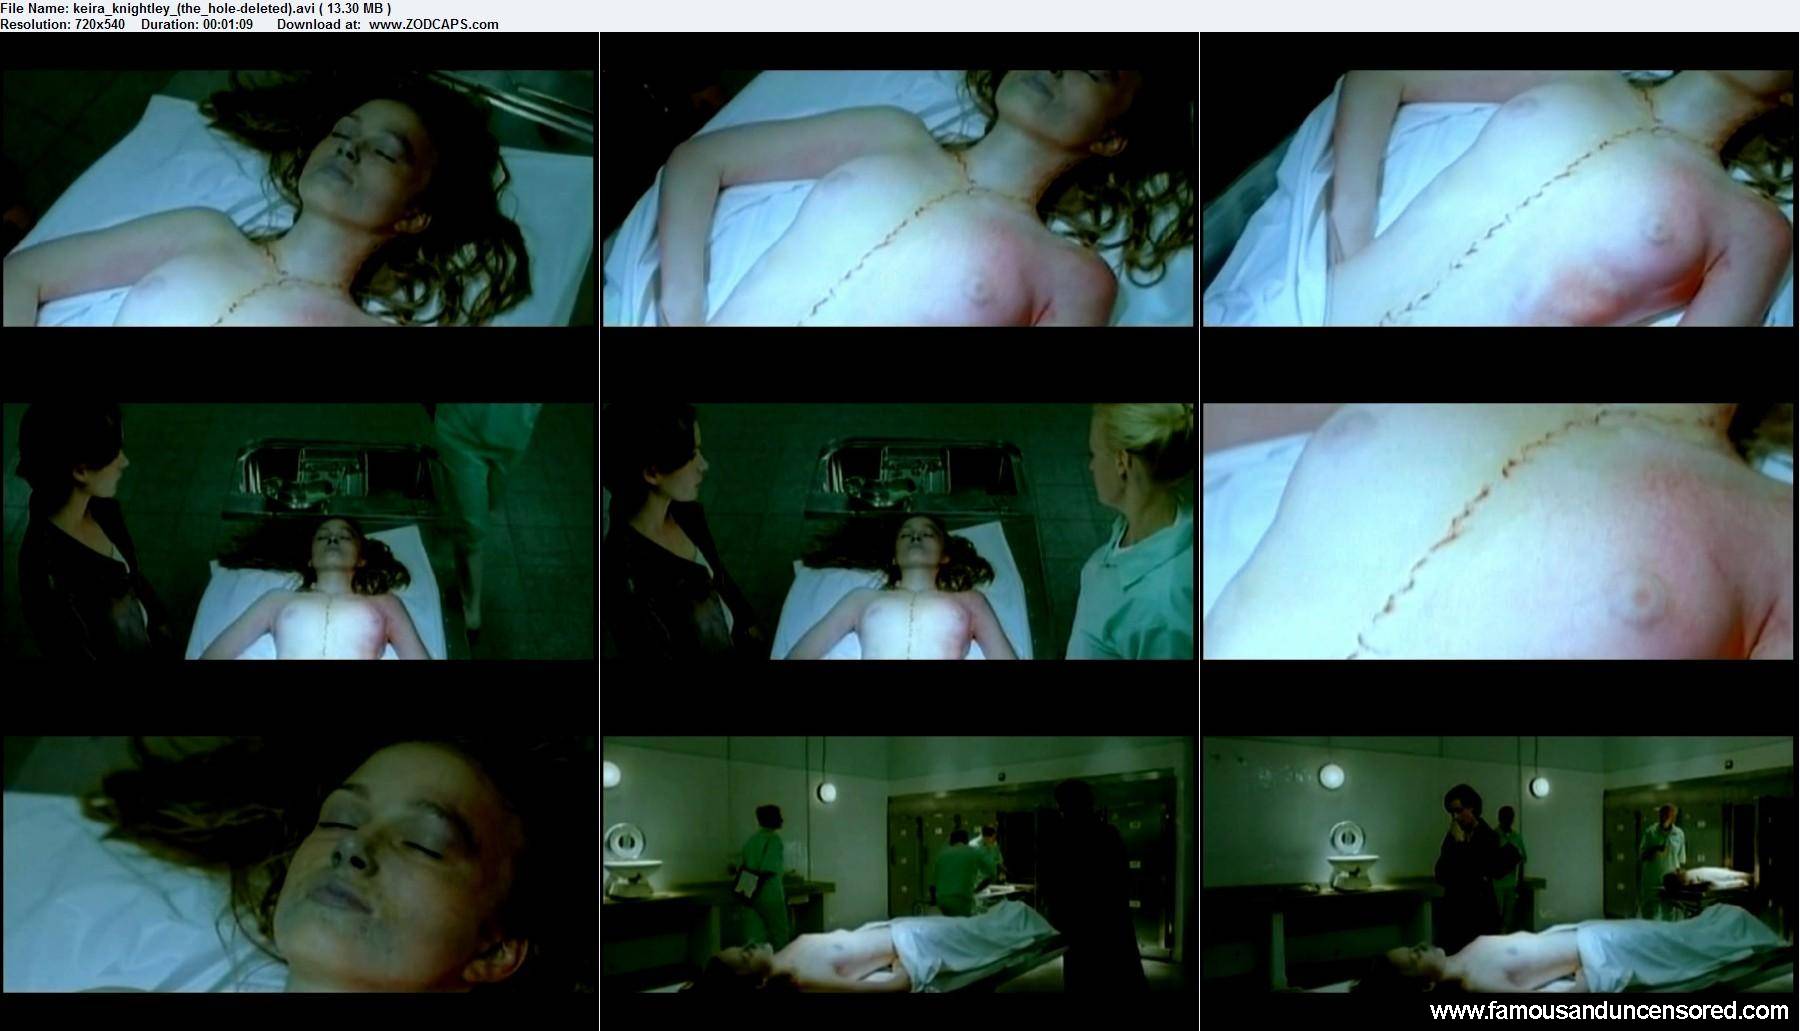 Keira knightley nude in the hole